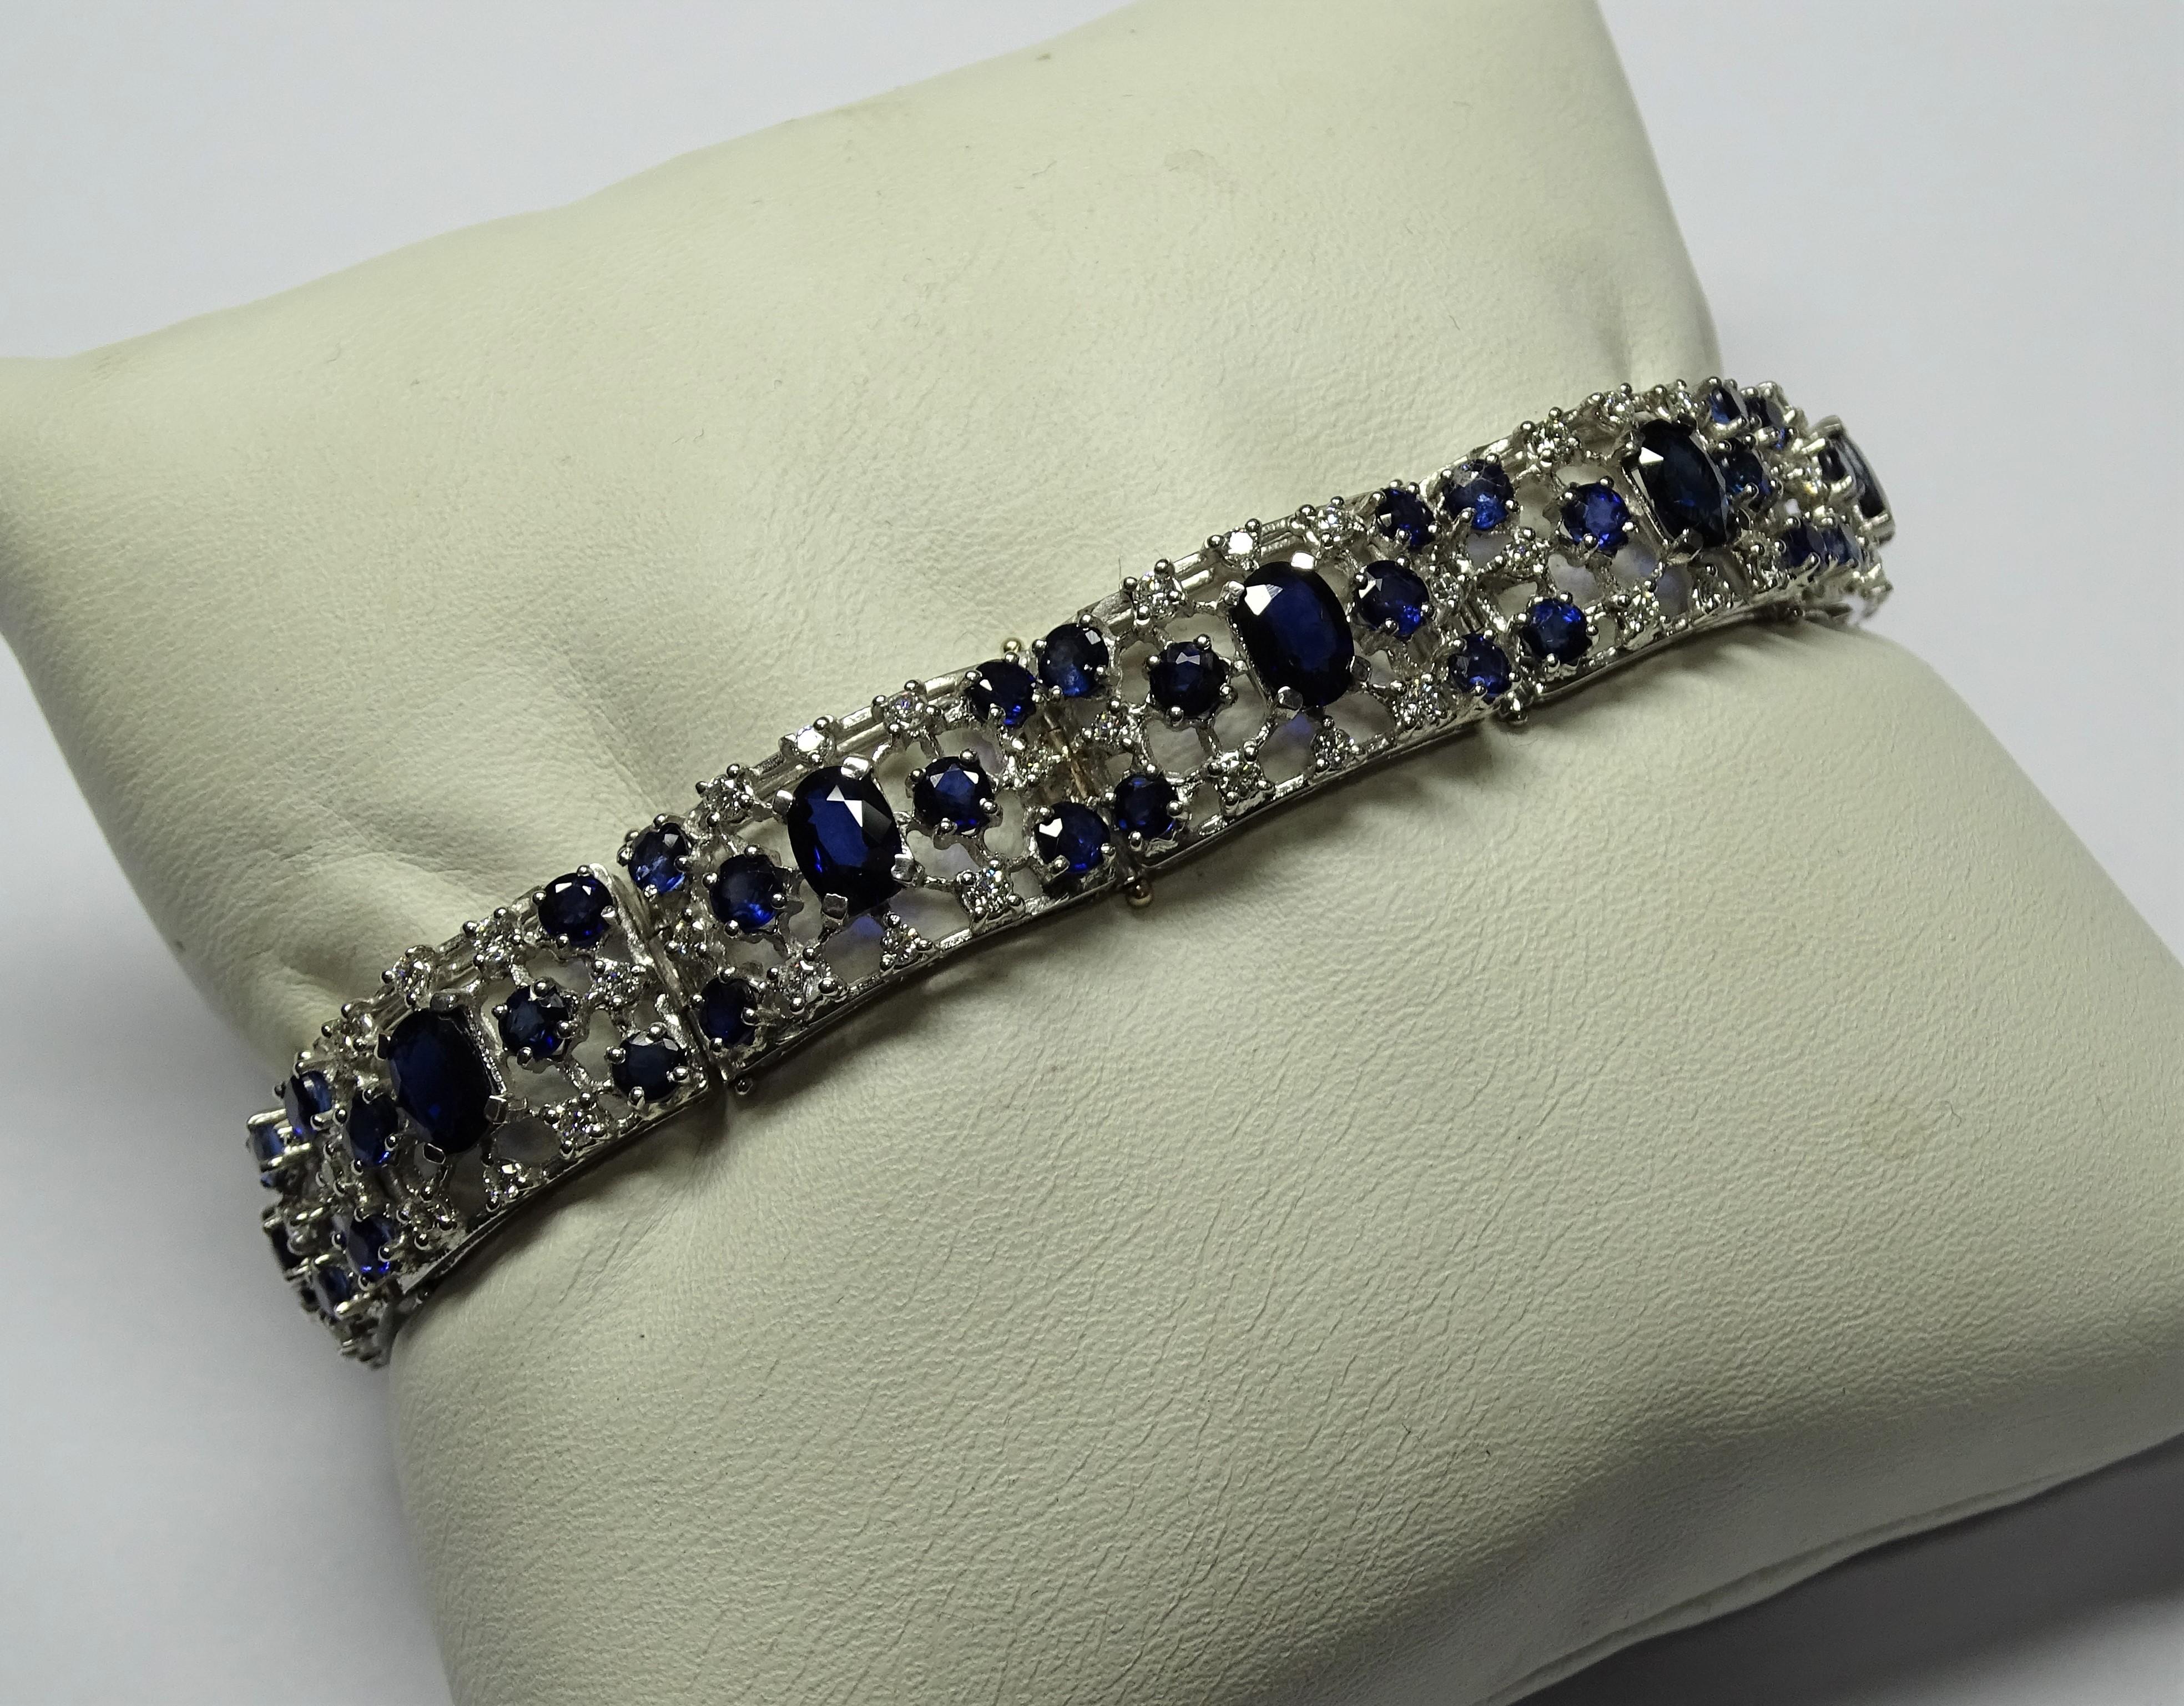 The Bracelet  is made of 18K White Gold.
The Bracelet has 1.76 Carat of White Diamonds Modern Round Cut.
The Bracelet has 13.84 Carats of Oval and Round Sapphires.
This Bracelet is inspired by Art Deco.
We're a workshop so every piece is handmade,